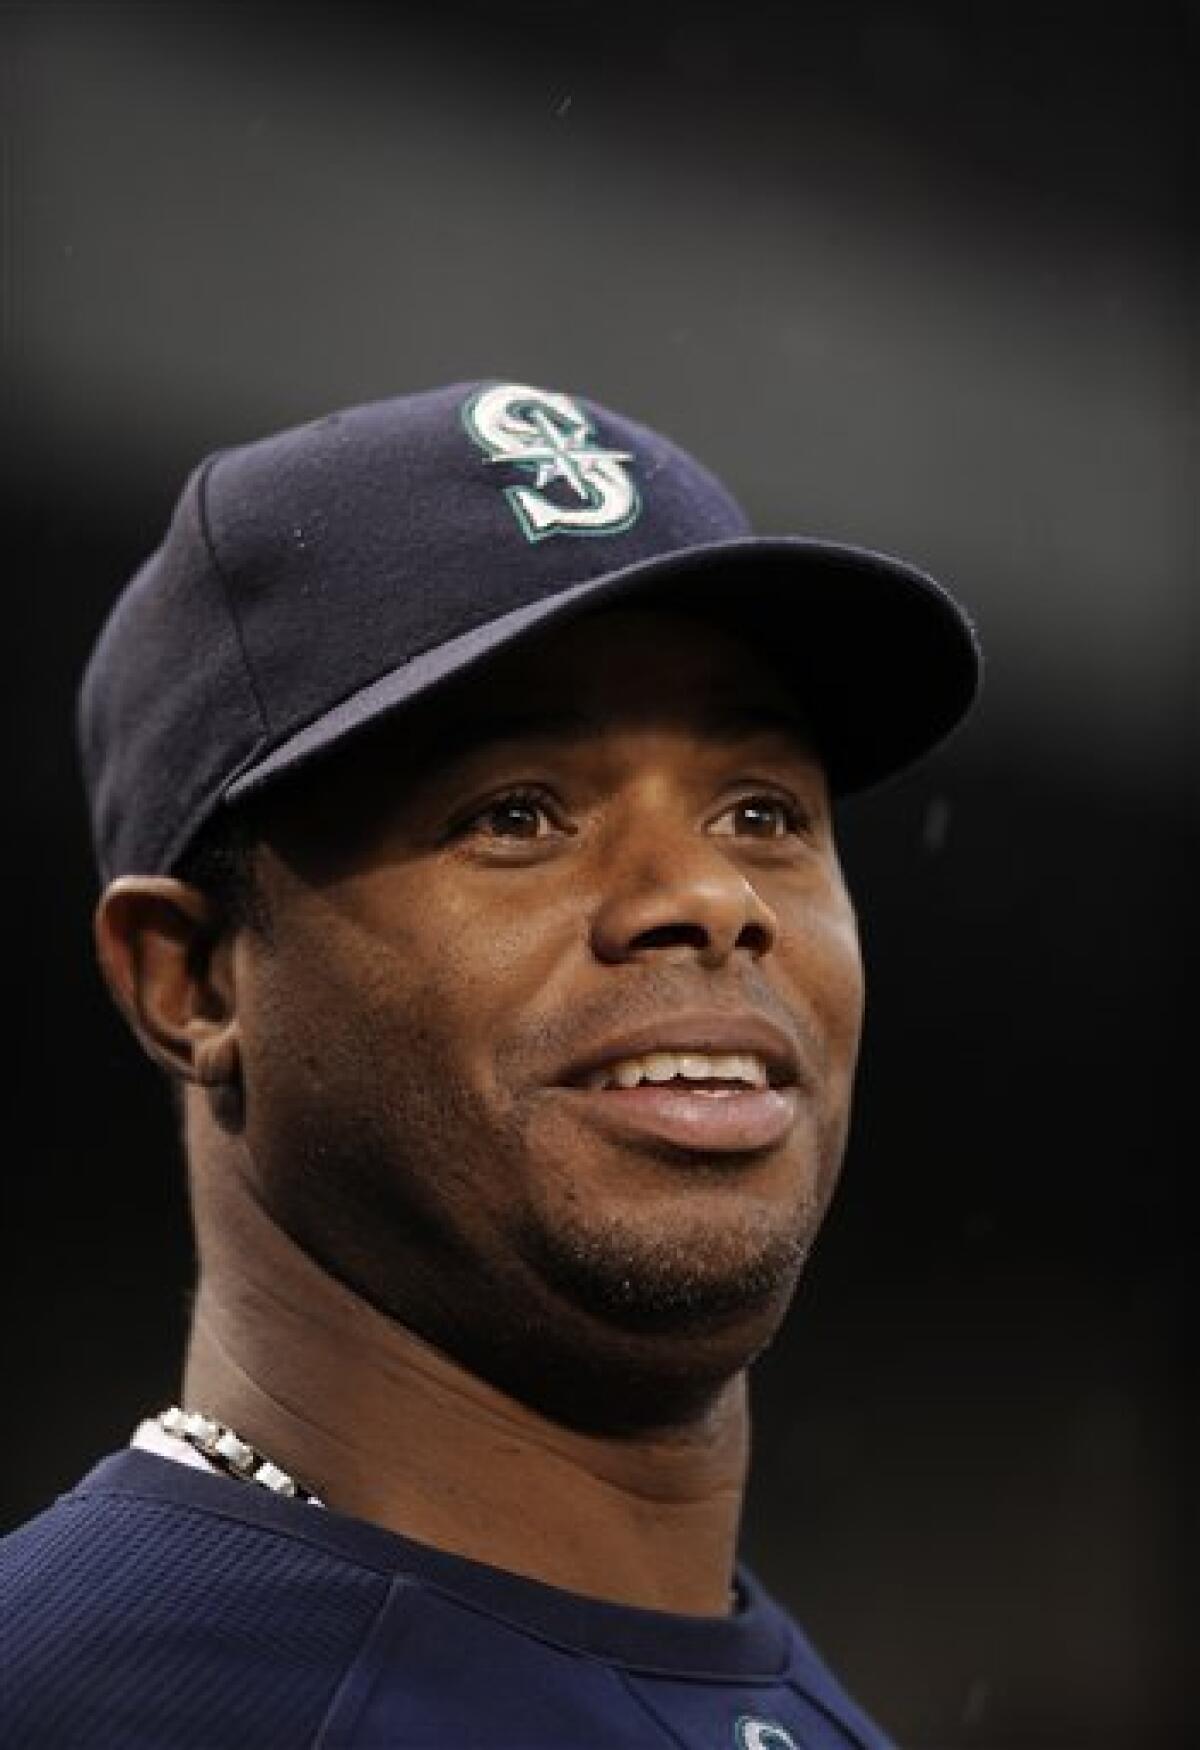 Ken Griffey Jr. retires at age 40 with 630 homers - The San Diego